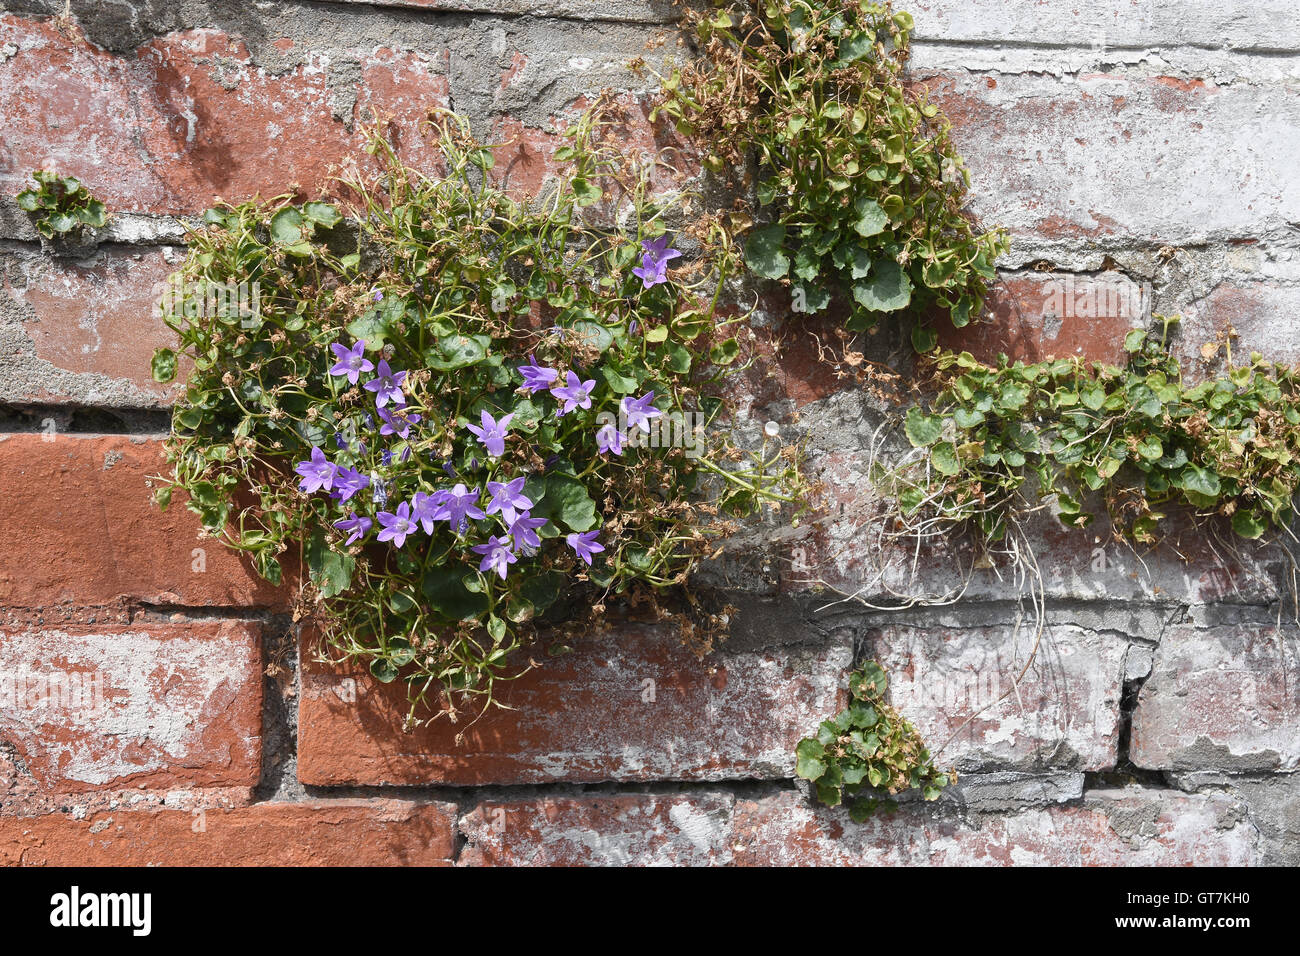 Flowers growing on a brick wall in Ilminster,Somerset,UK Stock Photo